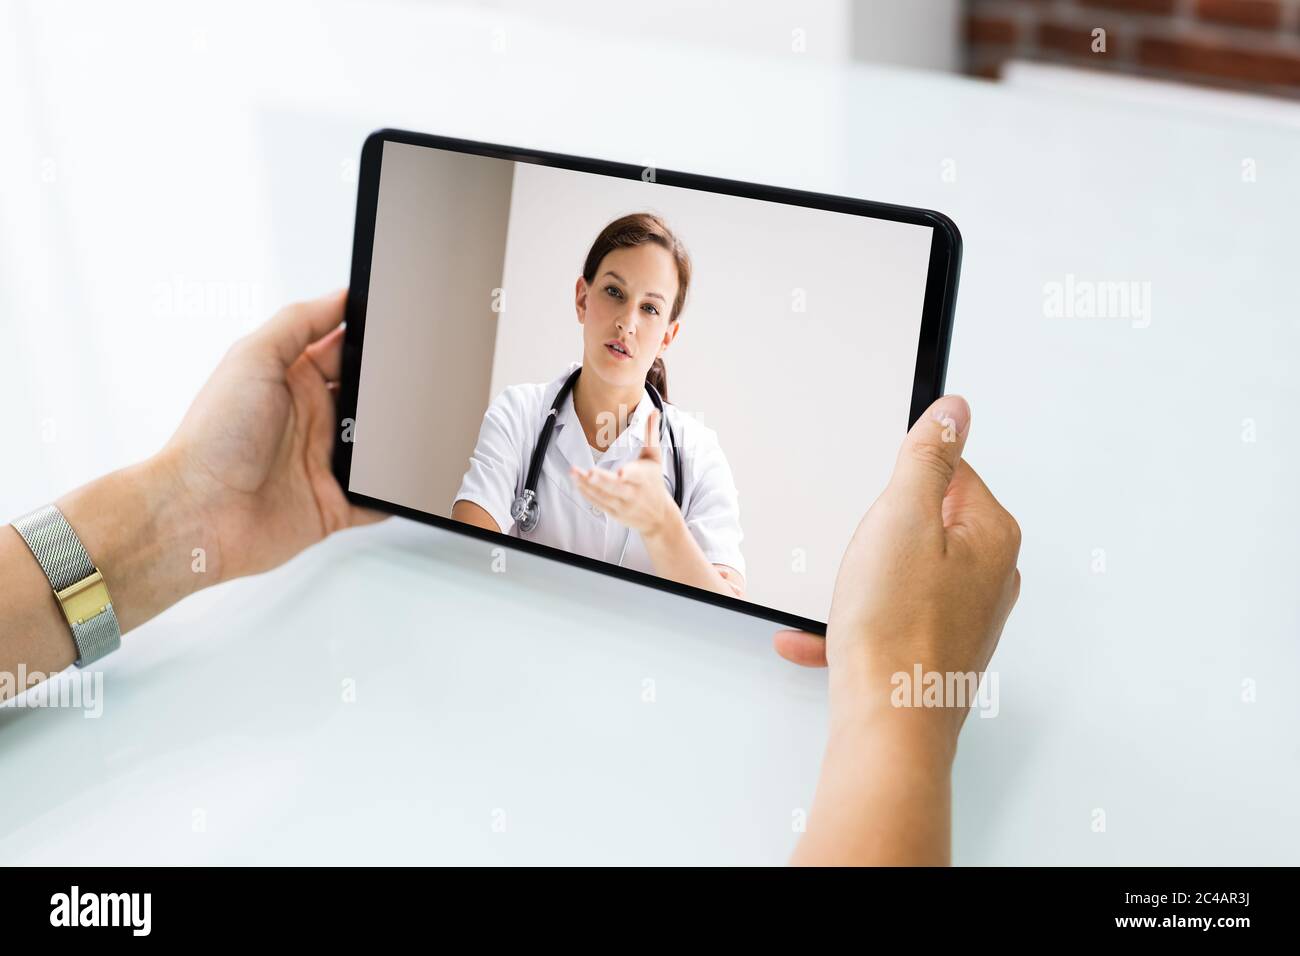 Video Conference Chat With Doctor On Tablet Stock Photo